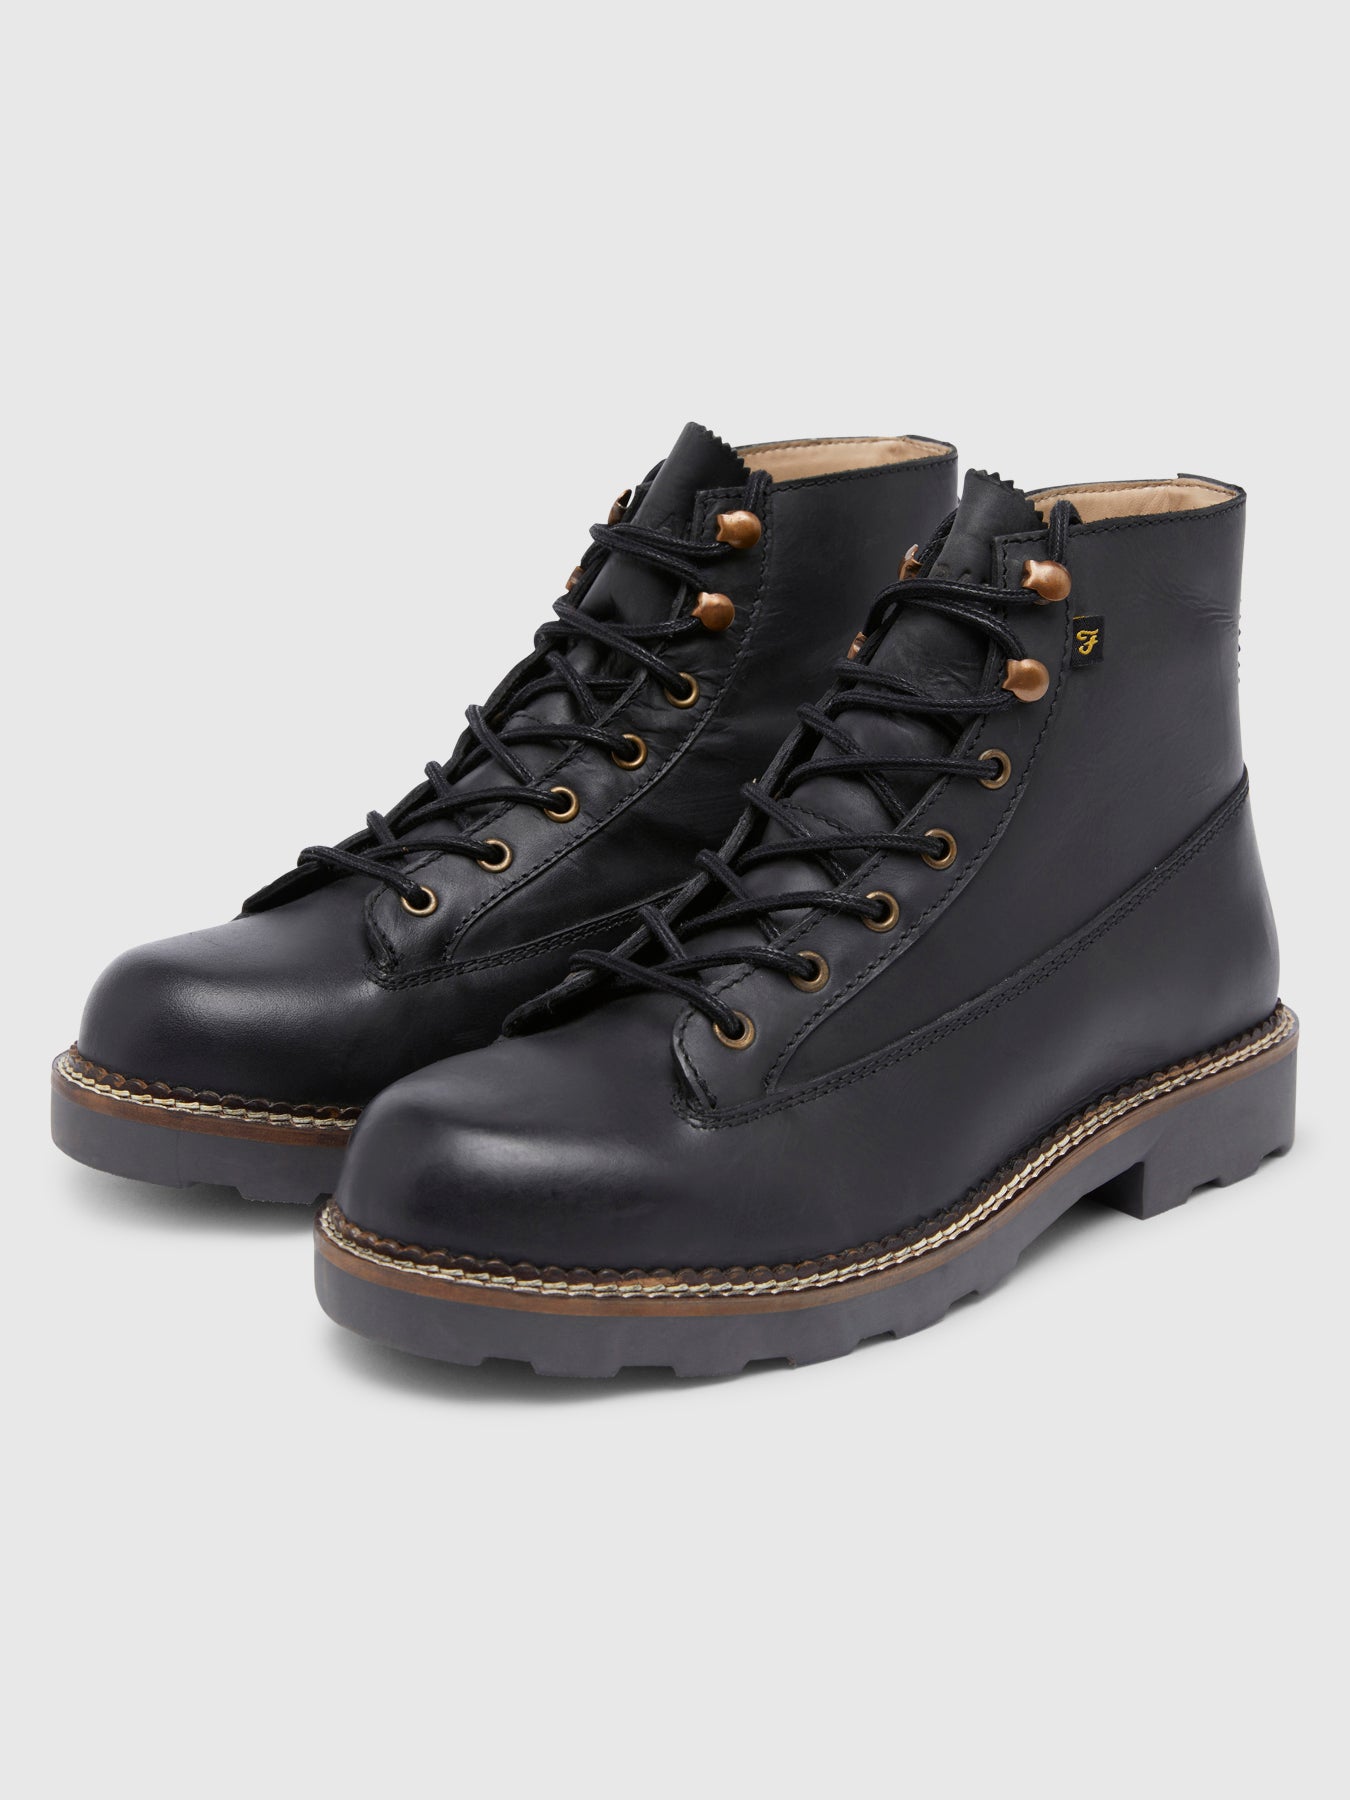 View Alpine Leather Boots In Jet Black information